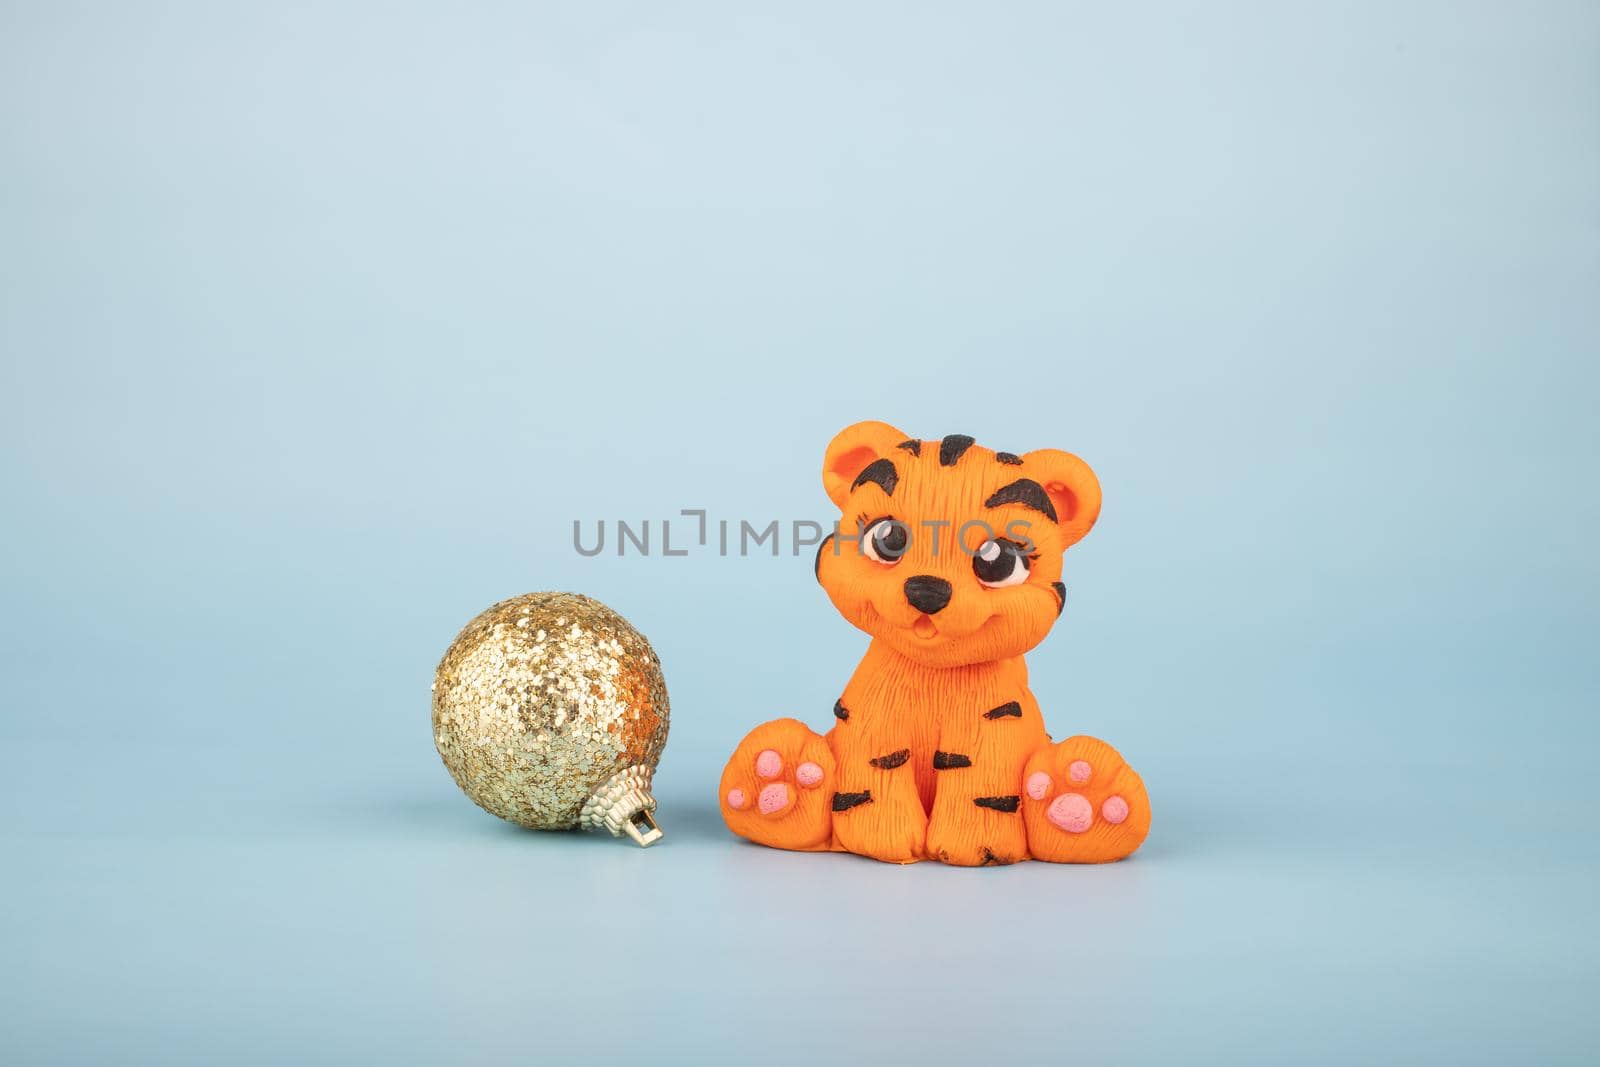 An orange tiger figurine on a blue background. The year 2022 is the year of the tiger according to the Eastern calendar. by bySergPo